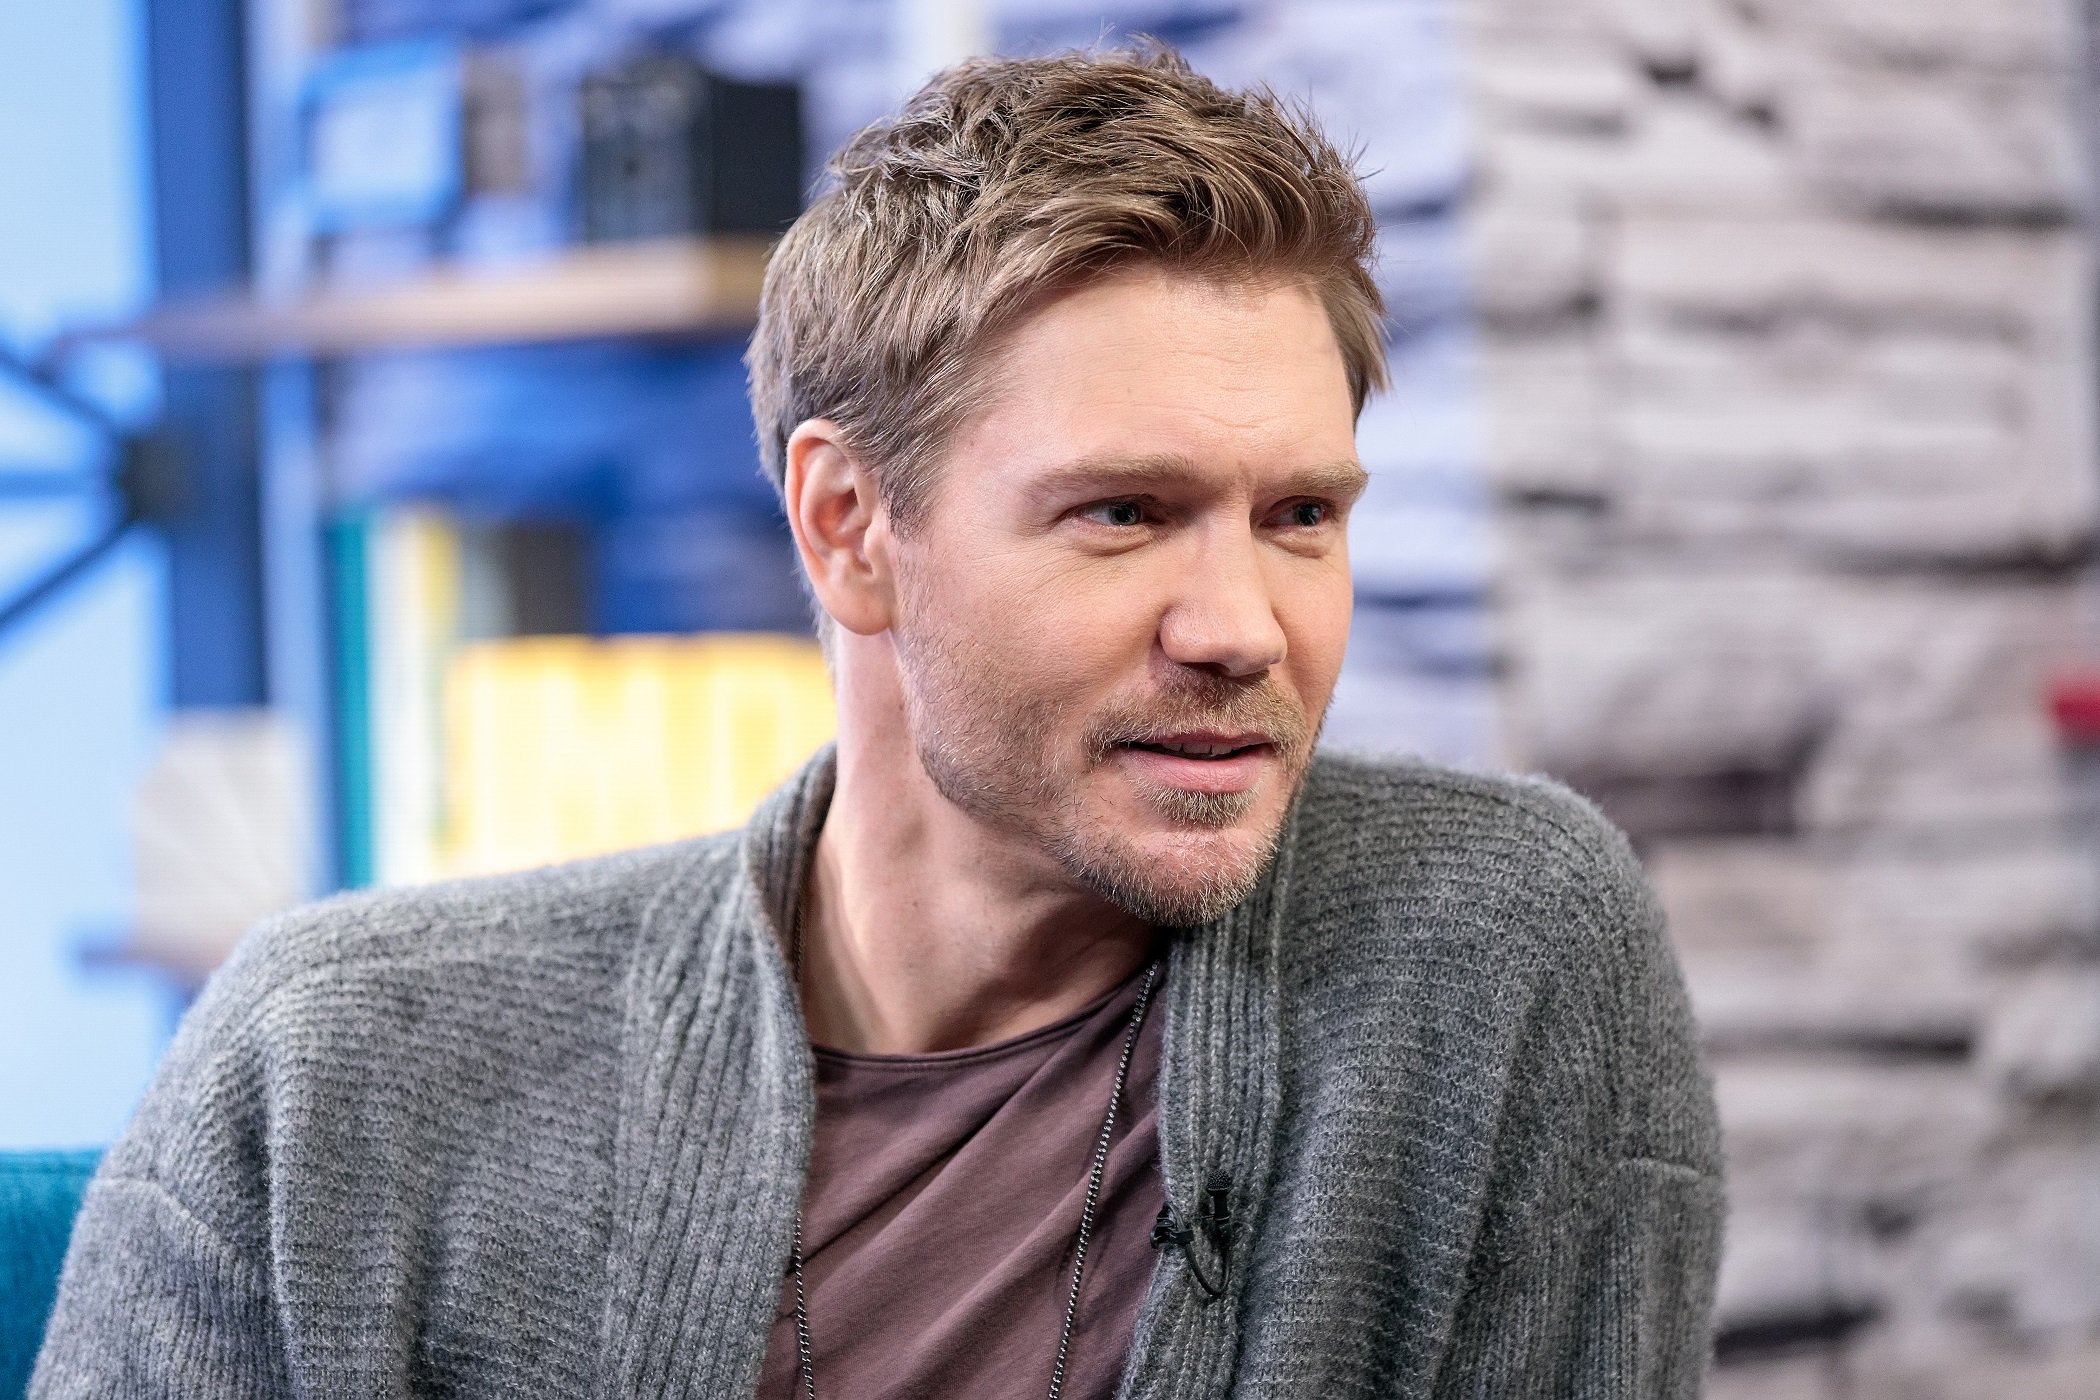 Chad Michael Murray being interviewed on 'The IMDb Show' in 2019 in California